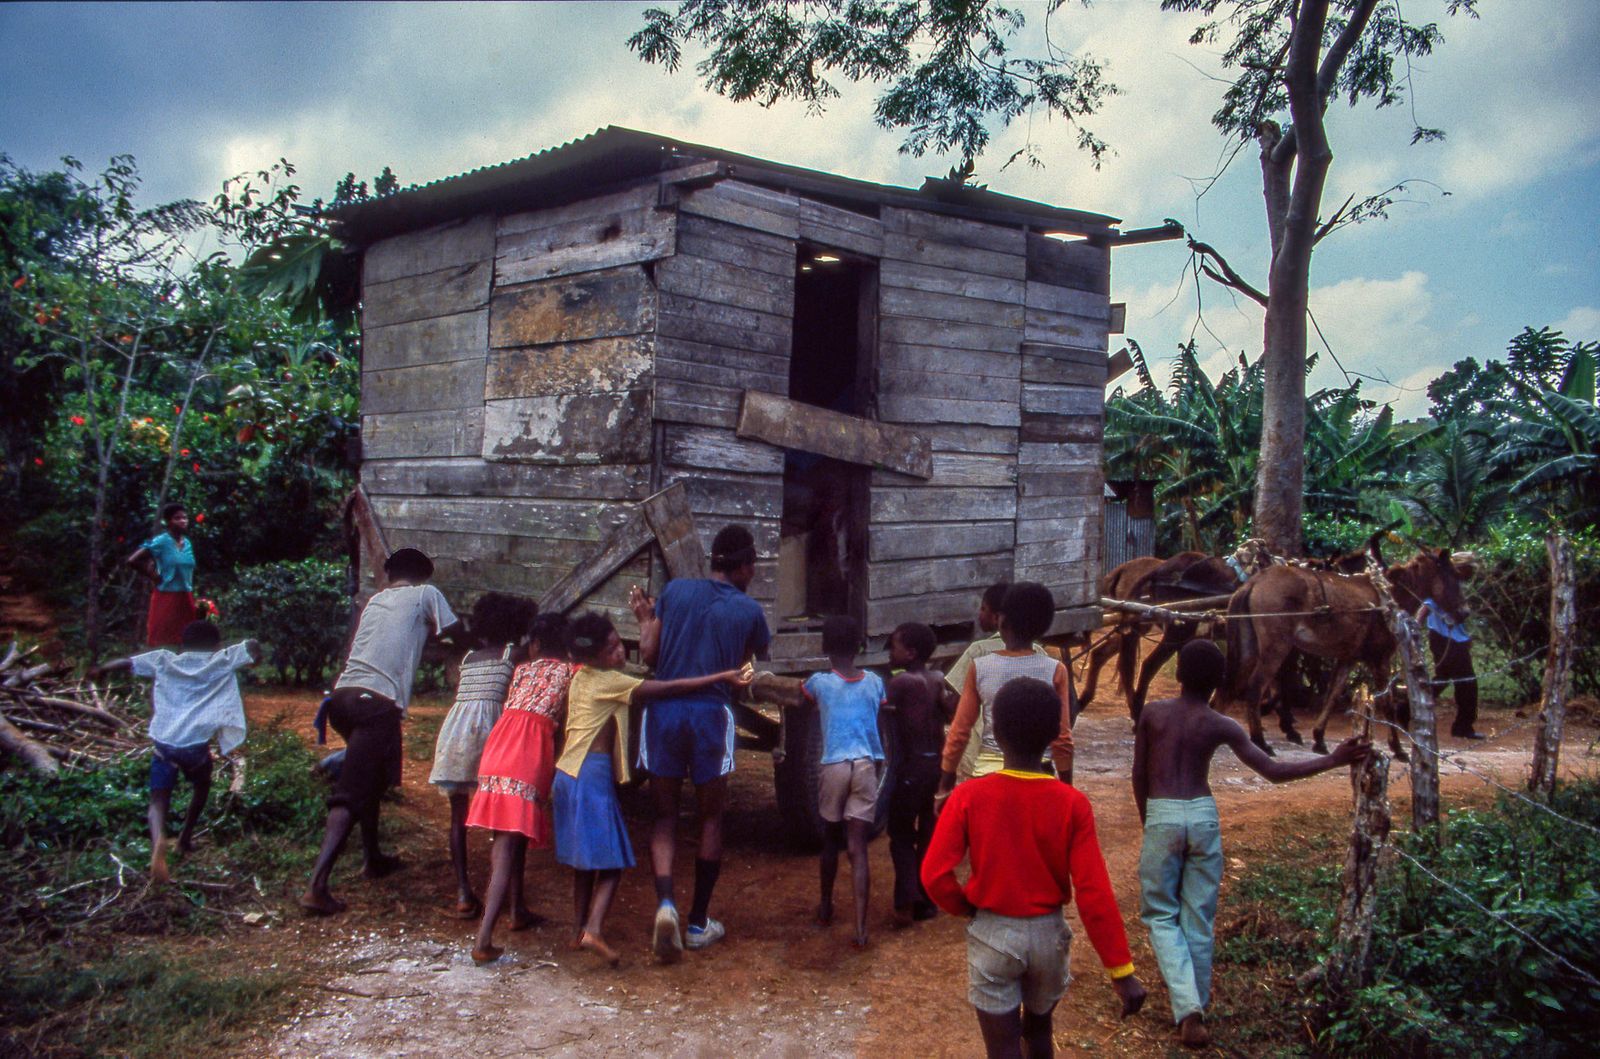 © Steven Edson - It takes a village to move a wooden shed by horseback through the small rural roads of Jamaica.